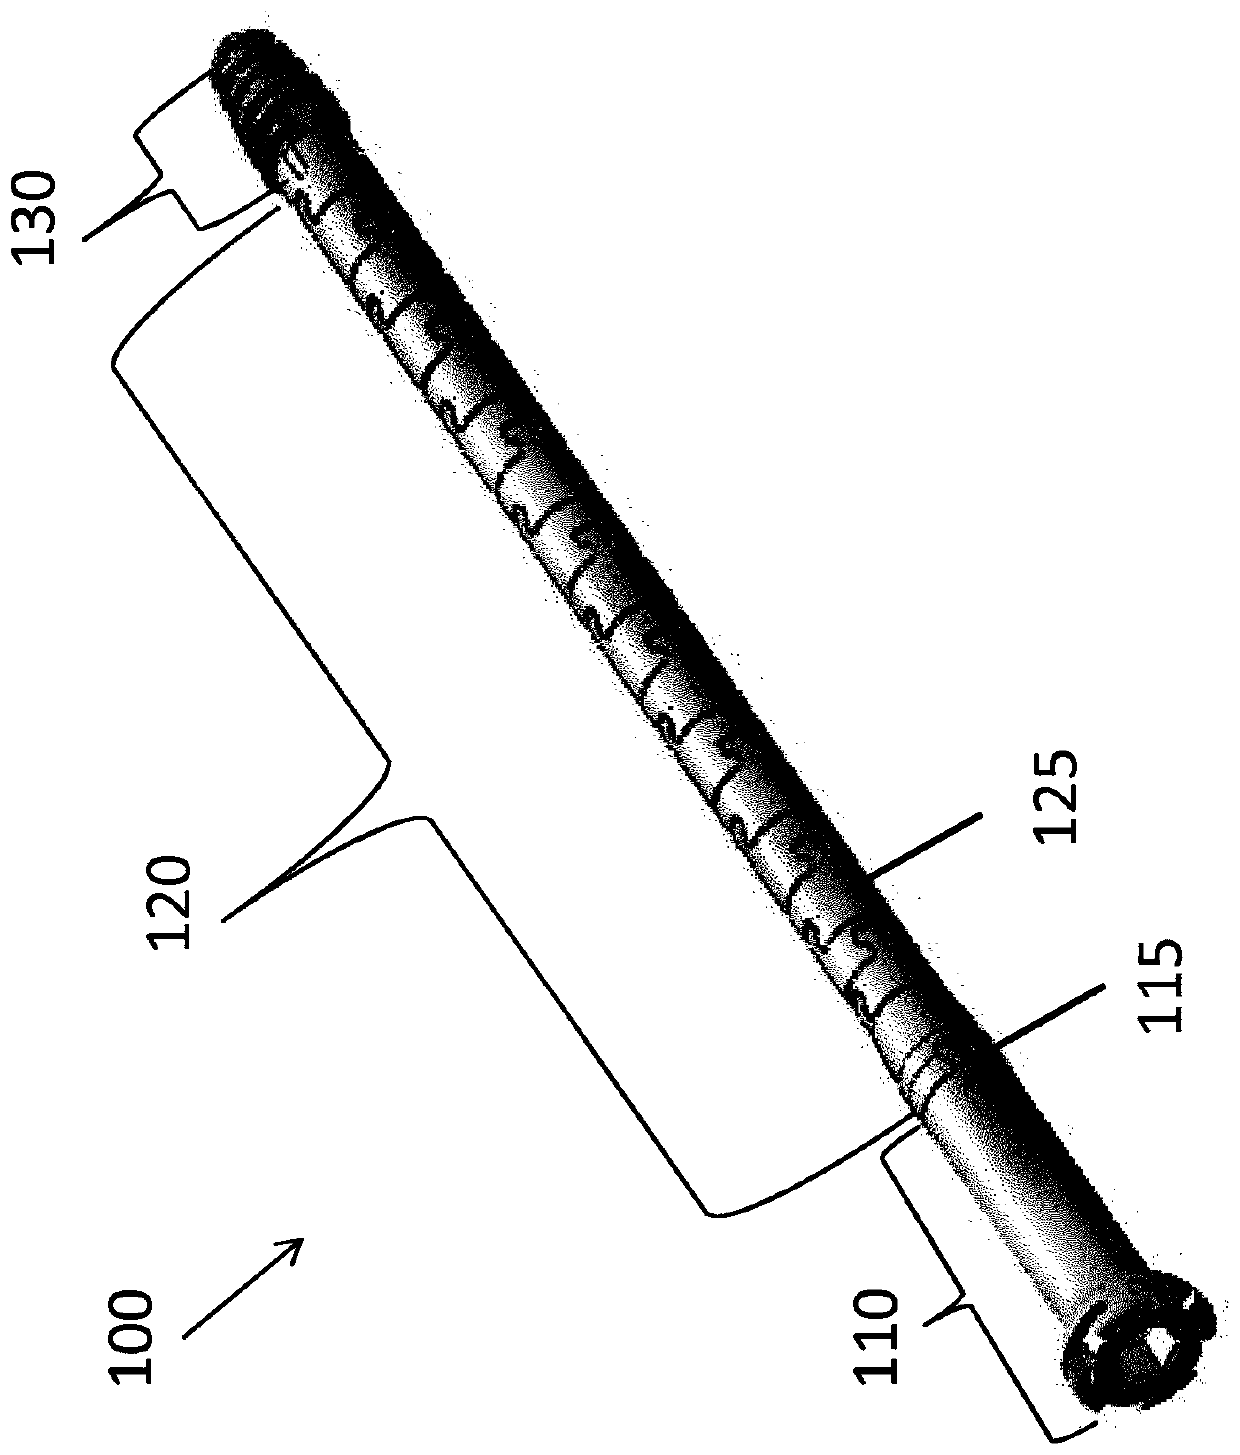 Intramedullary fixation device with shape locking interface